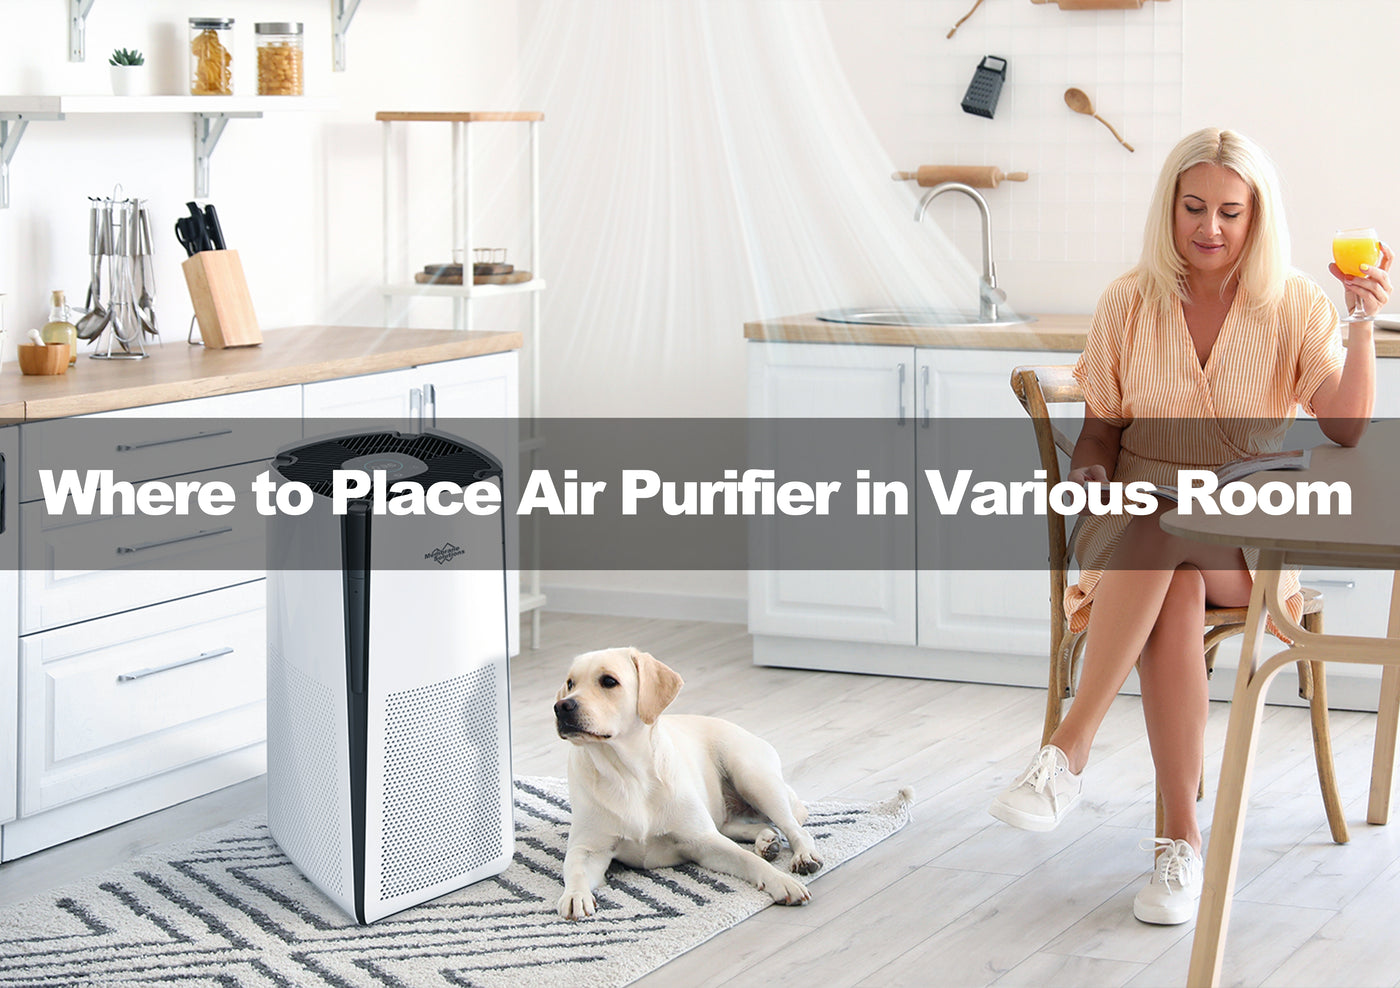 Where to Place Air Purifier in Various Room